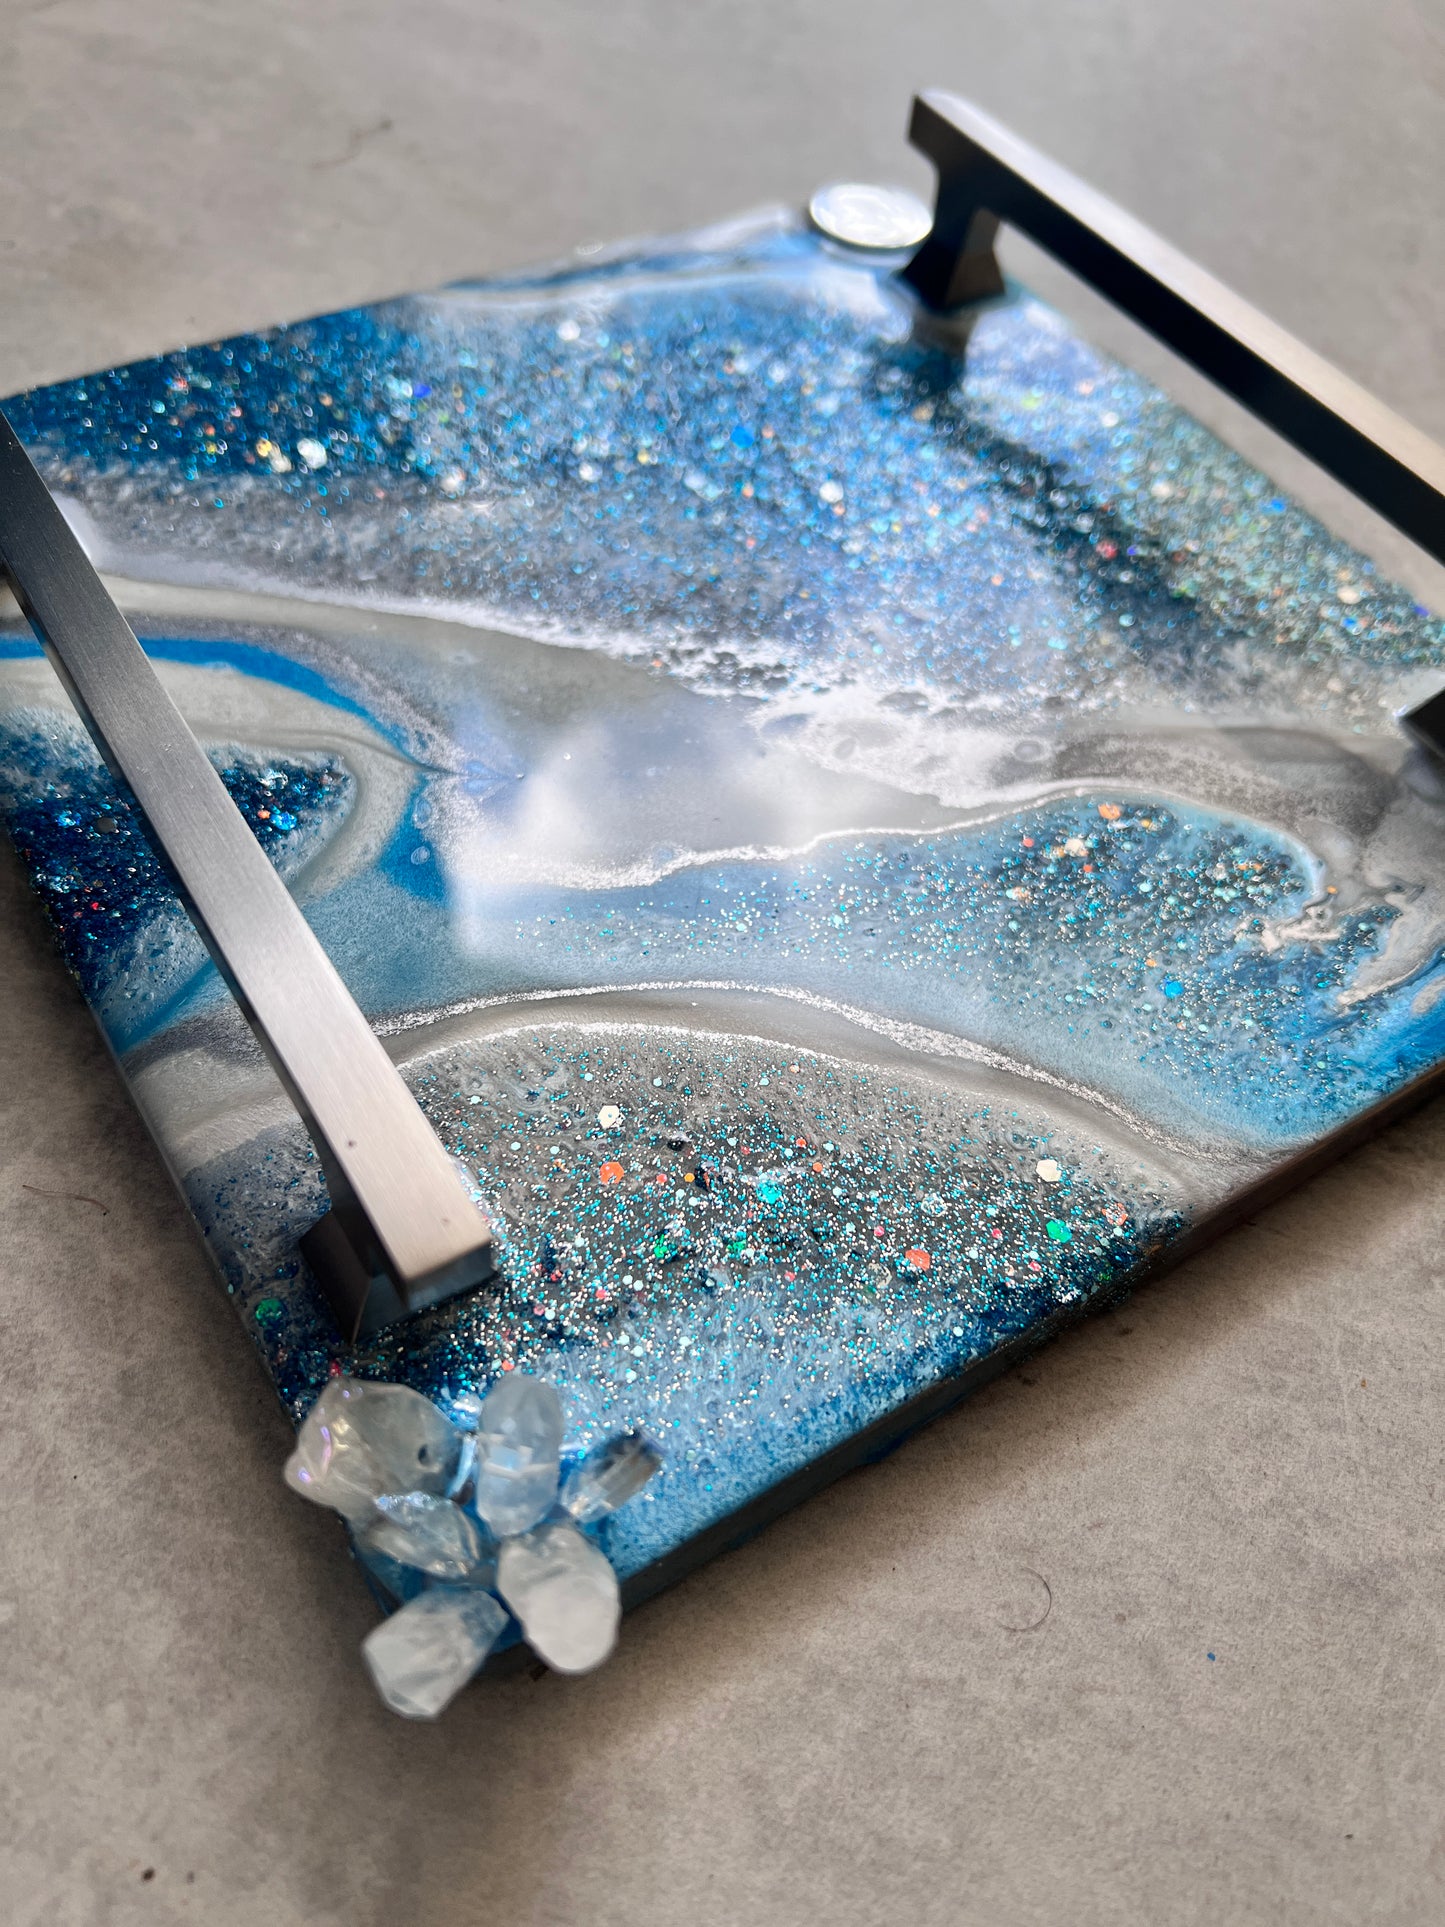 Mini tray in baby blue with silver handles